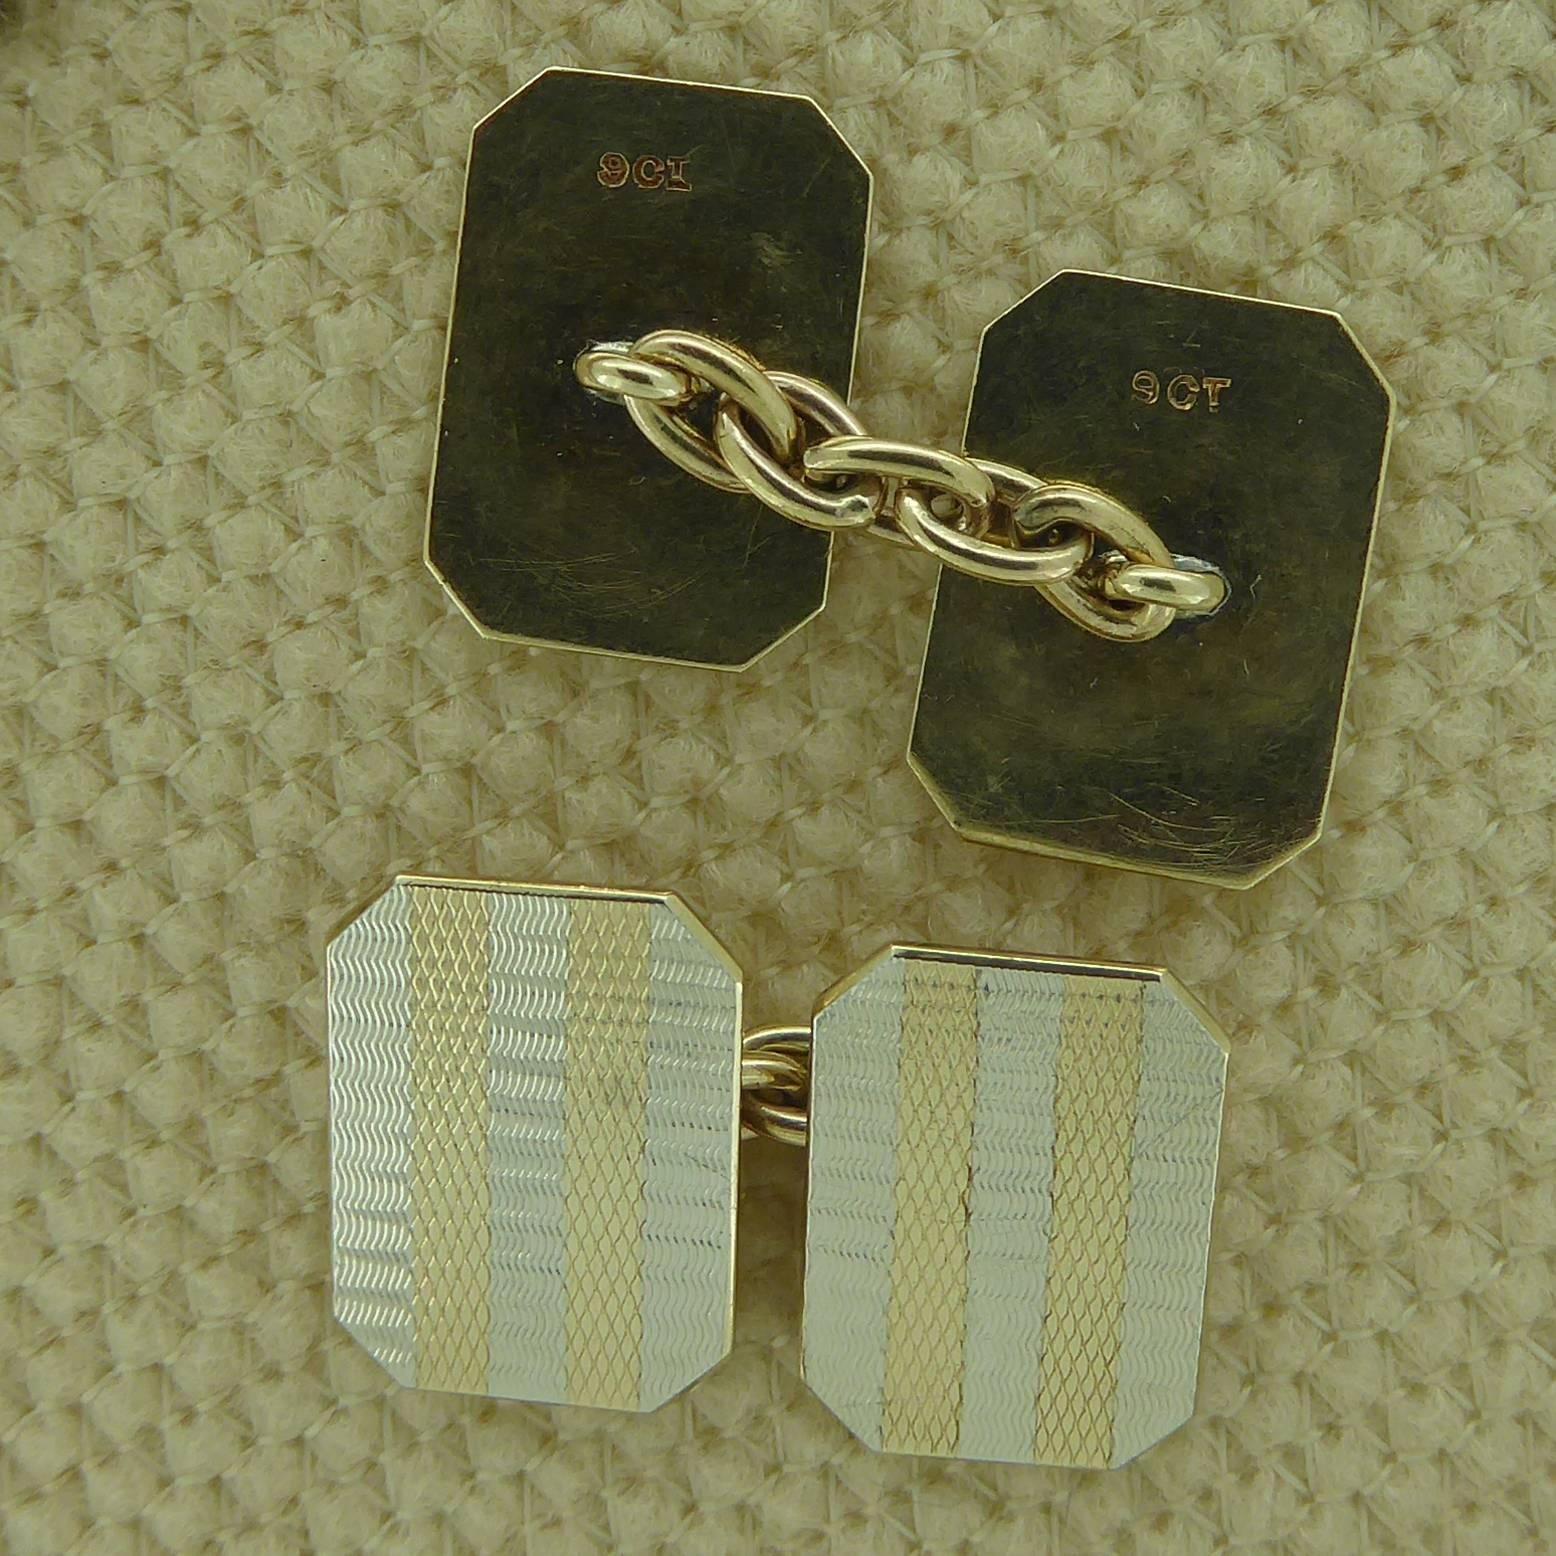 Men's Art Deco Style Cufflinks in Yellow and White Gold, Machine Engraved, circa 1960s